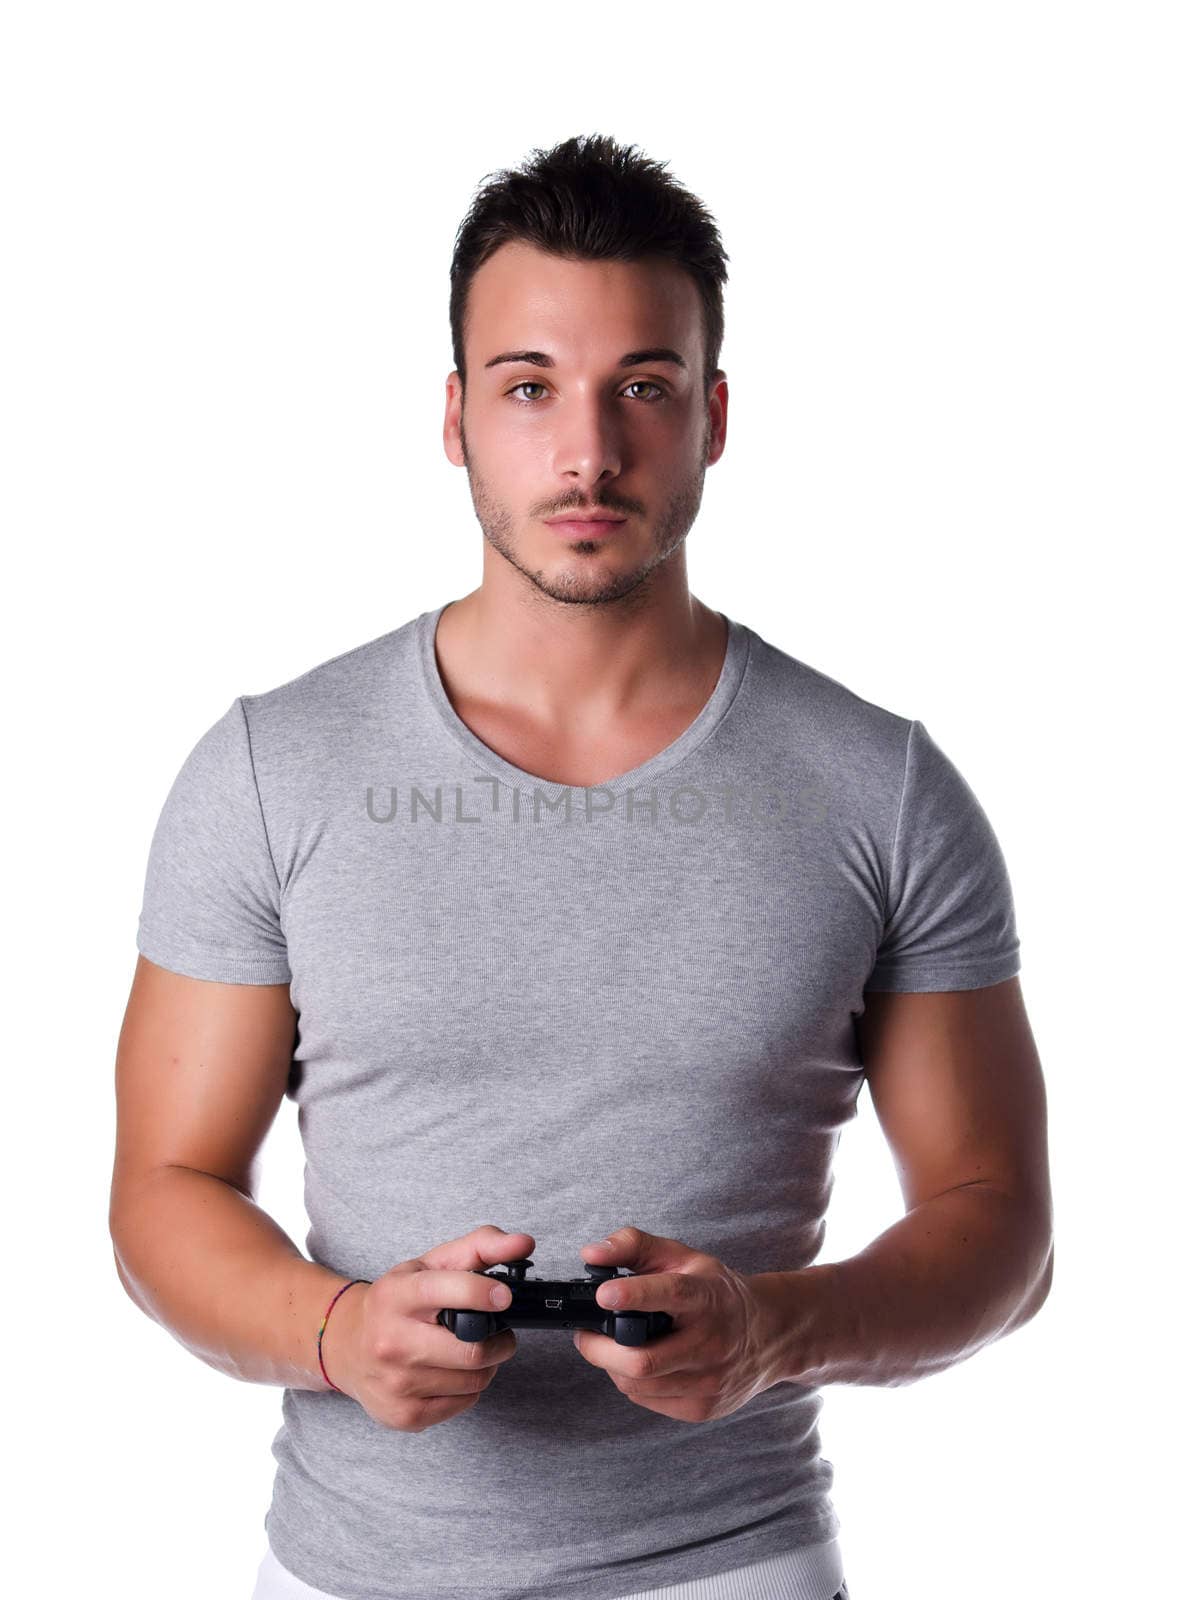 Handsome young man using joystick or joypad for videogames by artofphoto